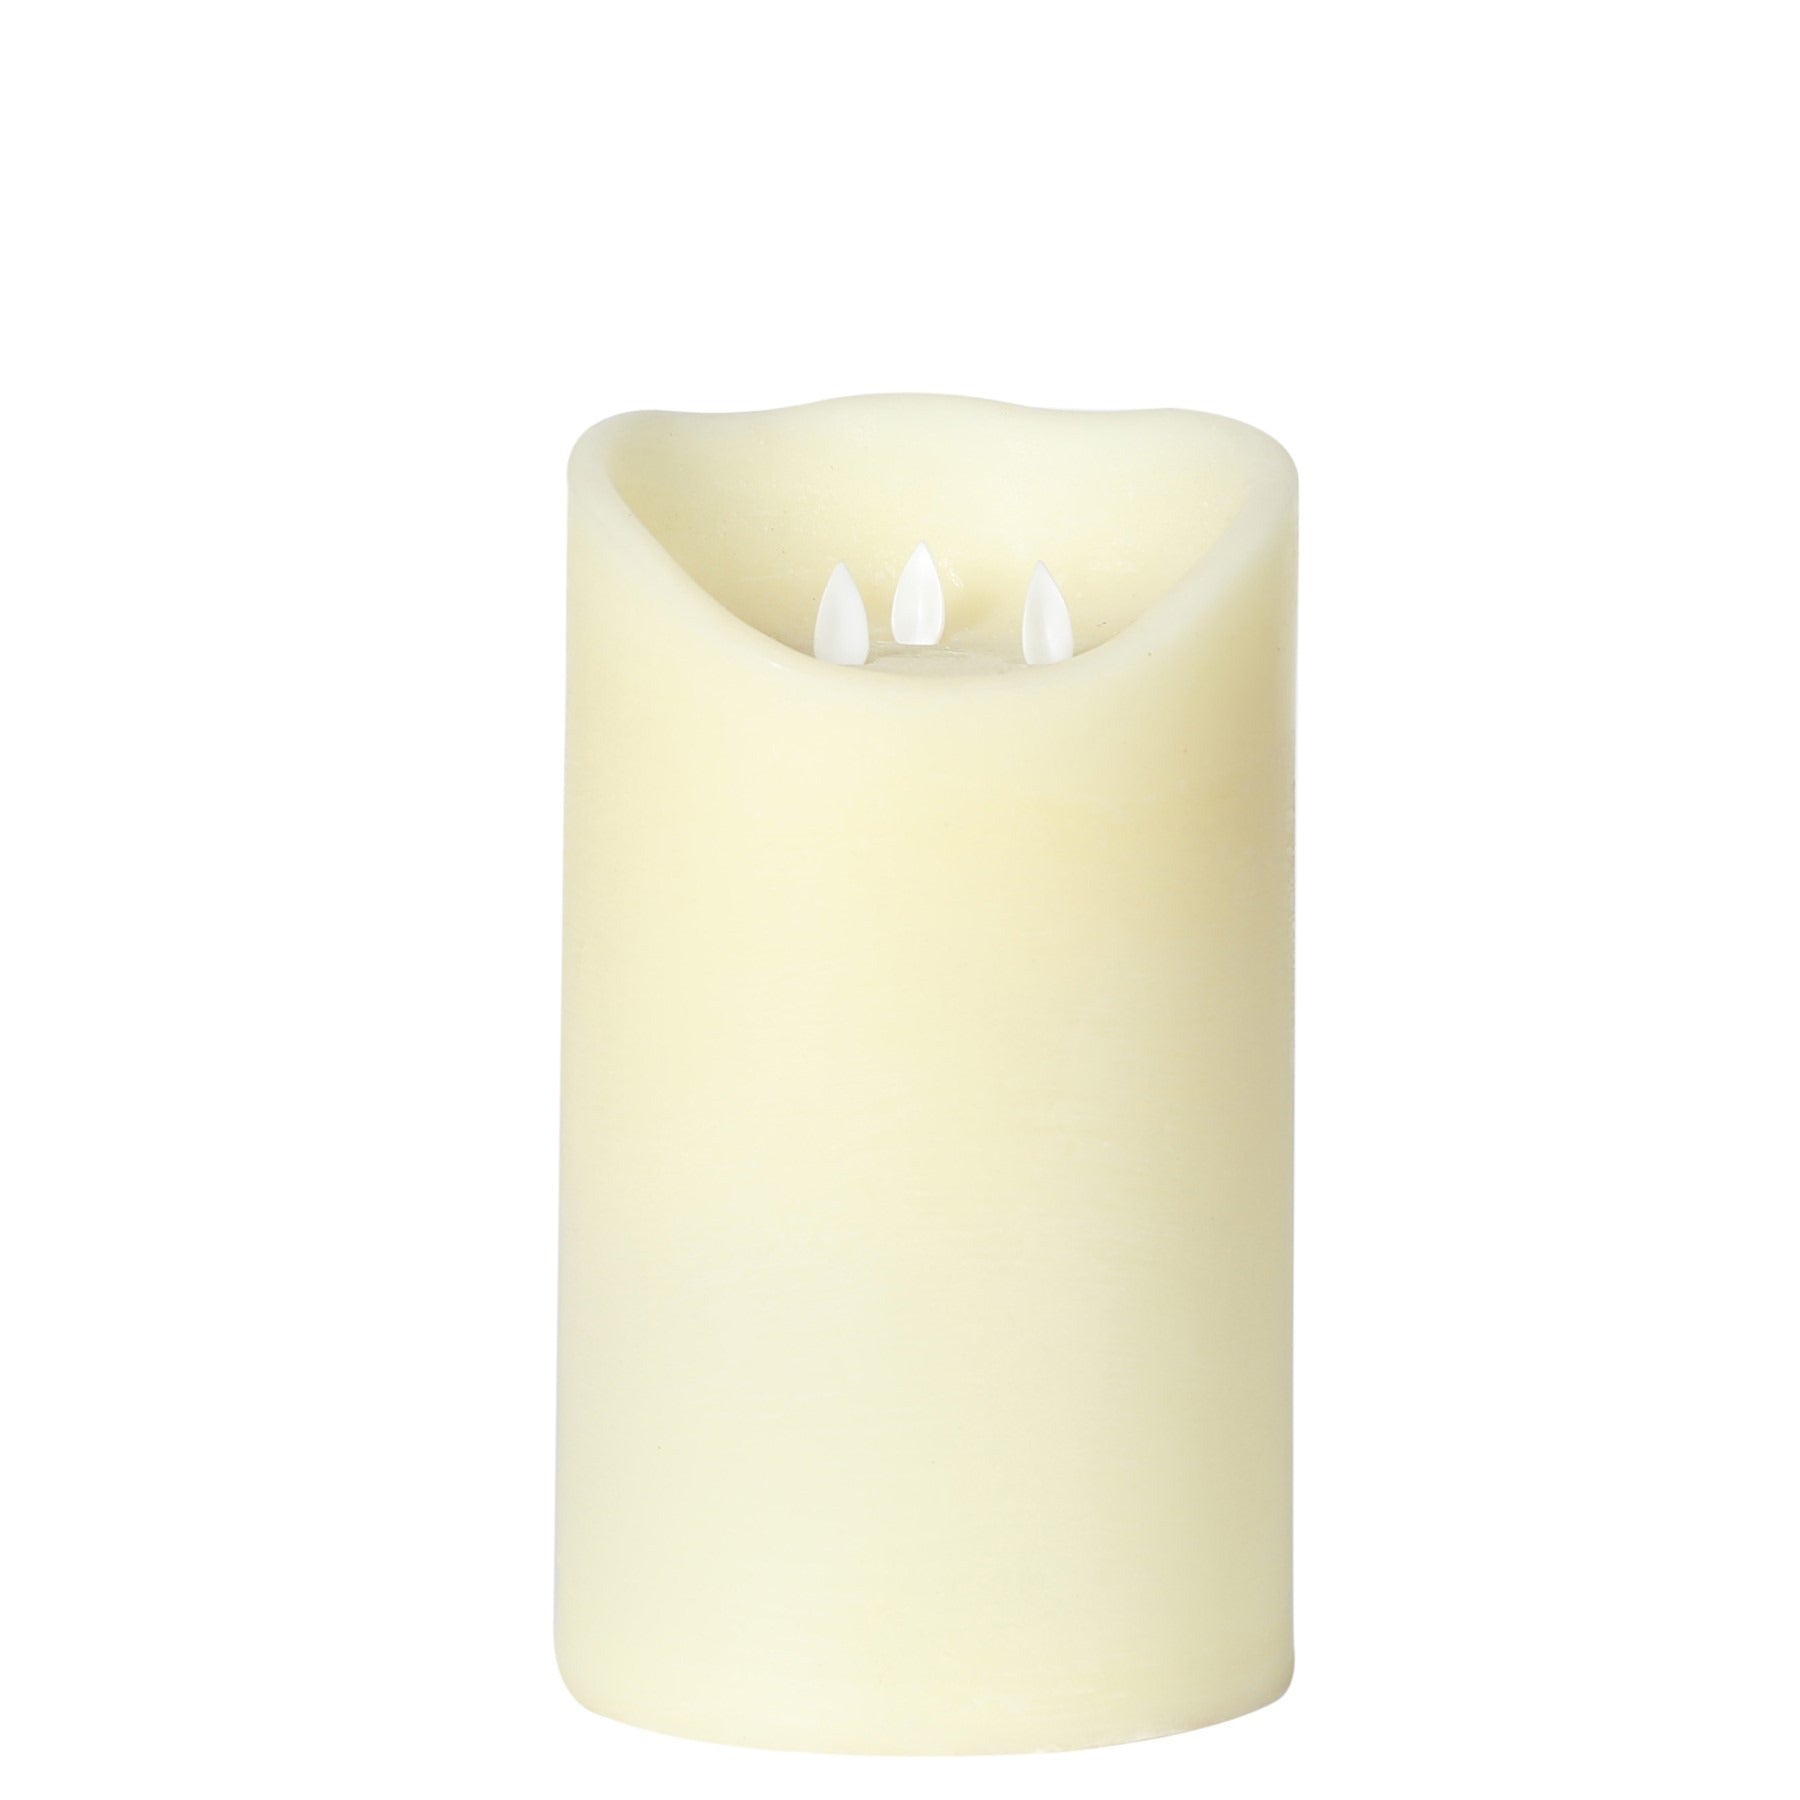 View Moving Flame LED Candle 15 x 25cm information